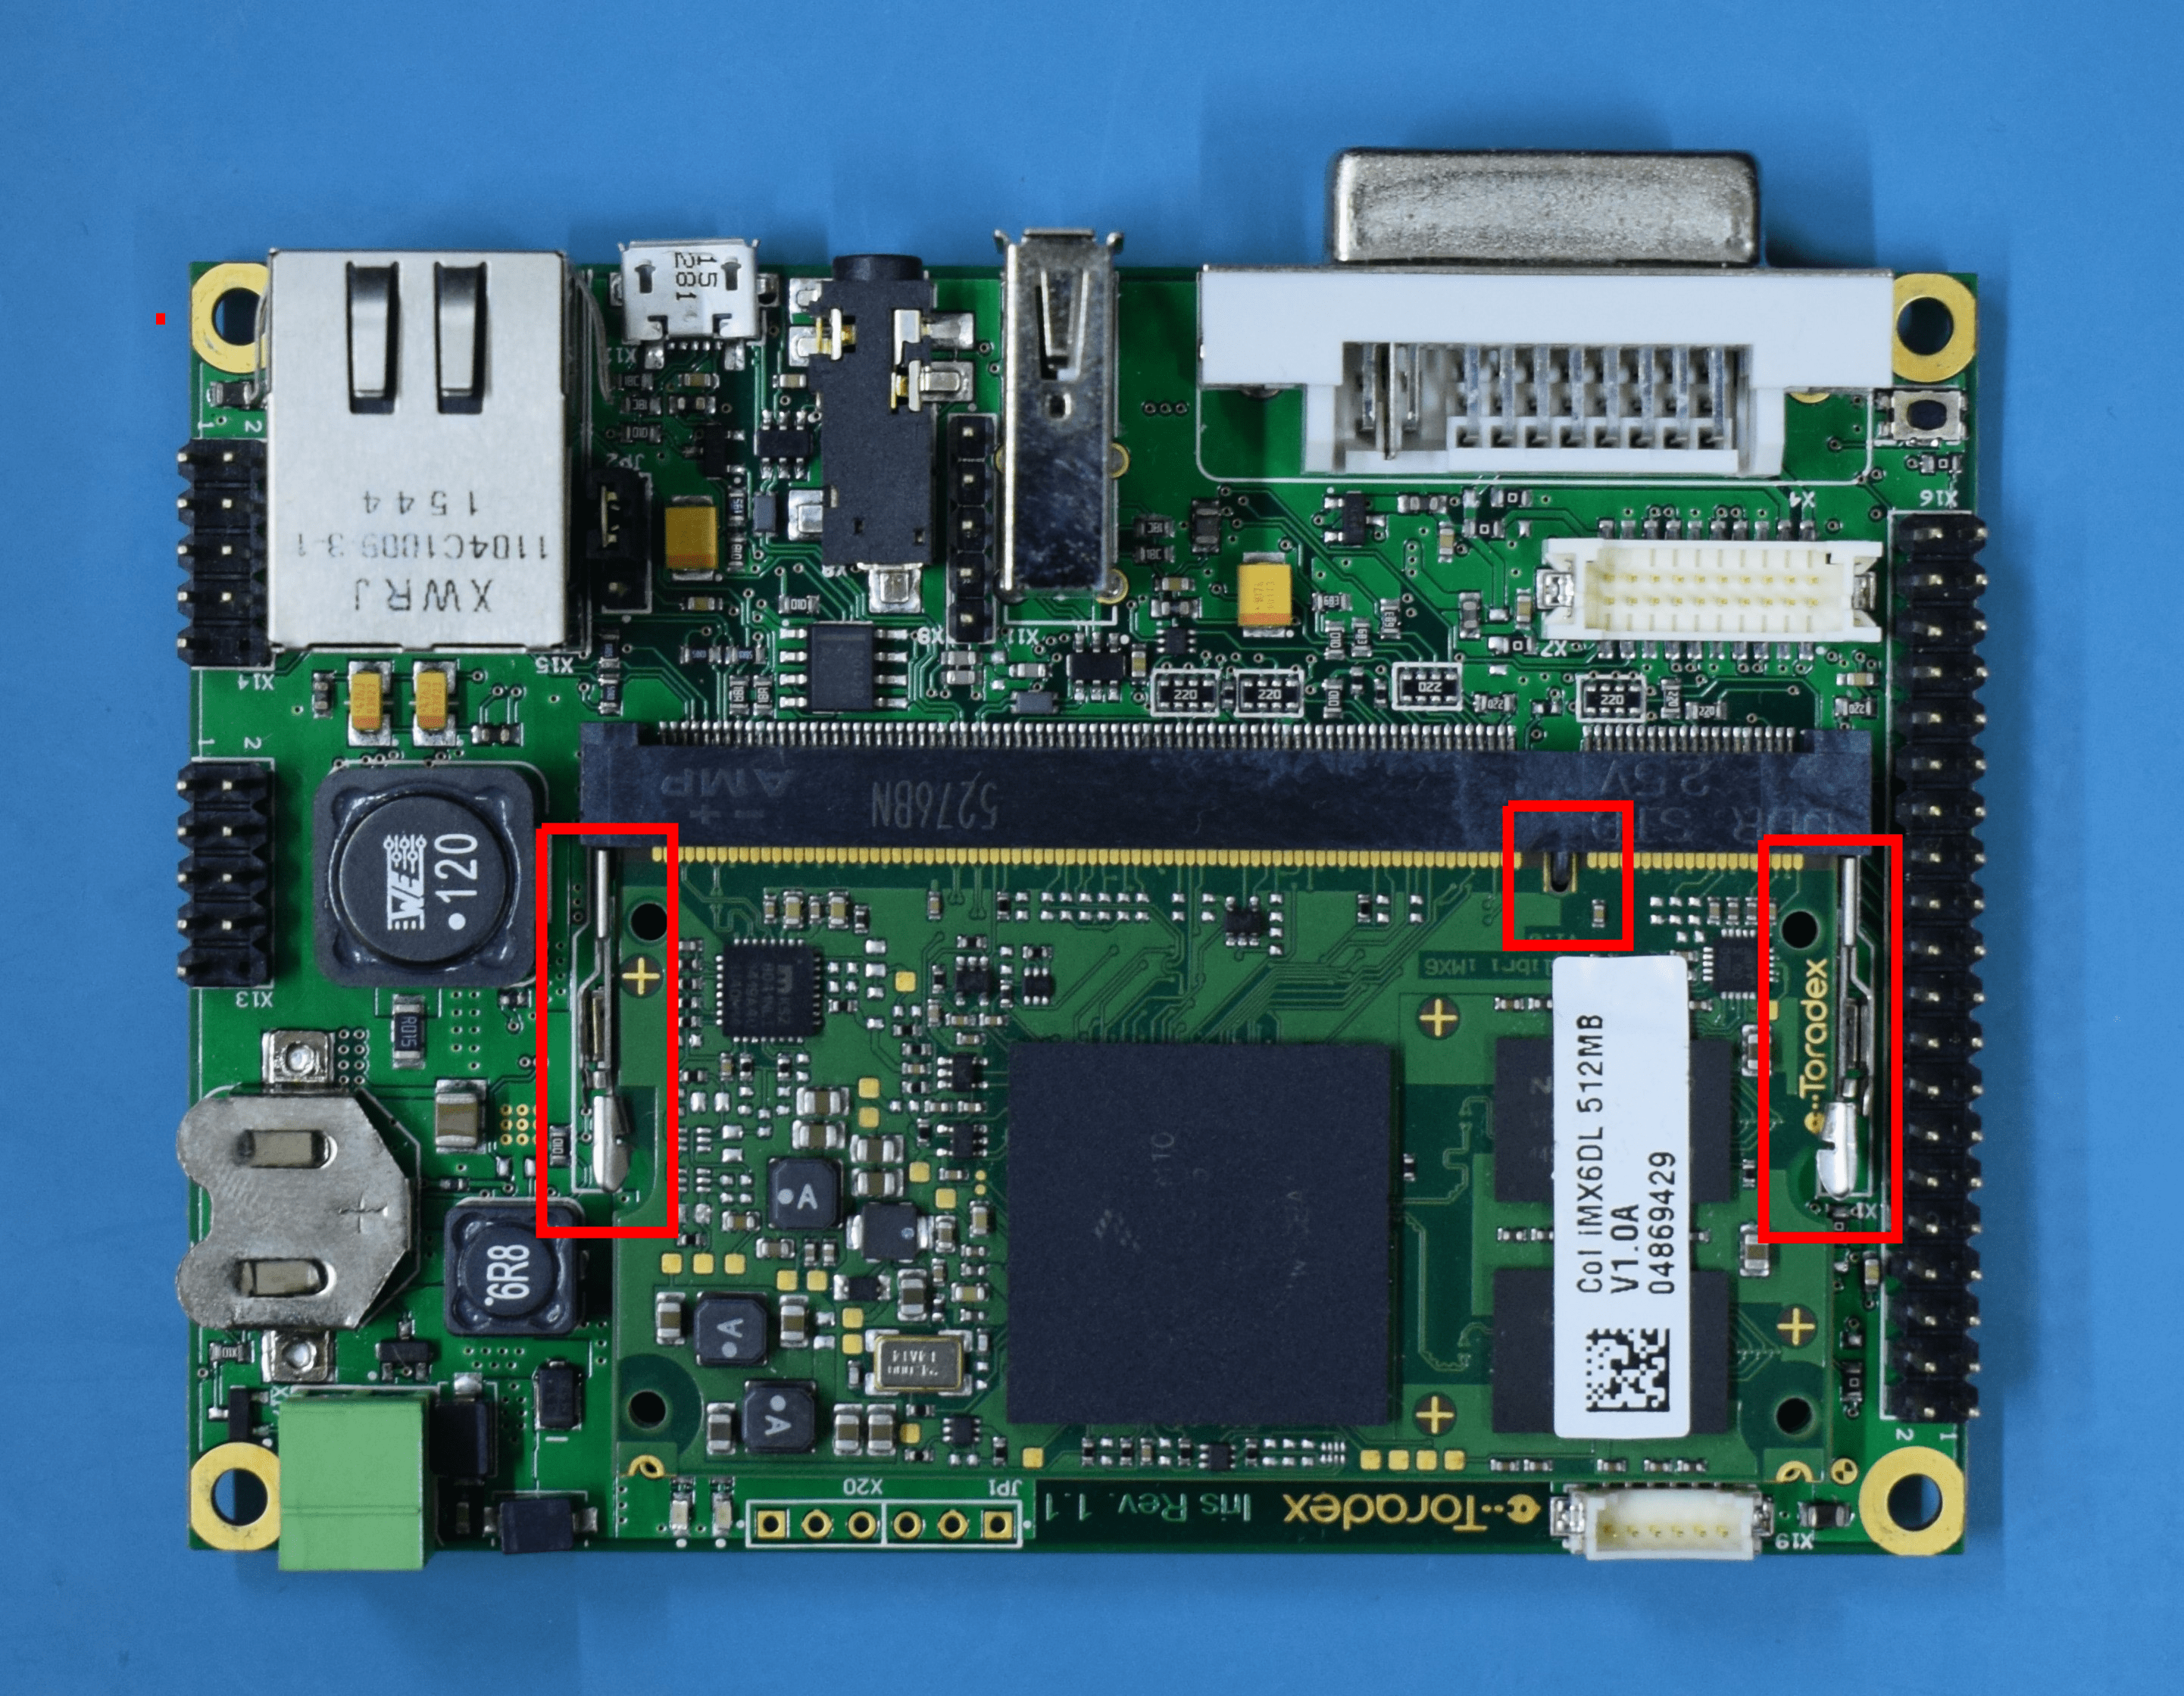 Computer on module connected to the Iris Carrier Board